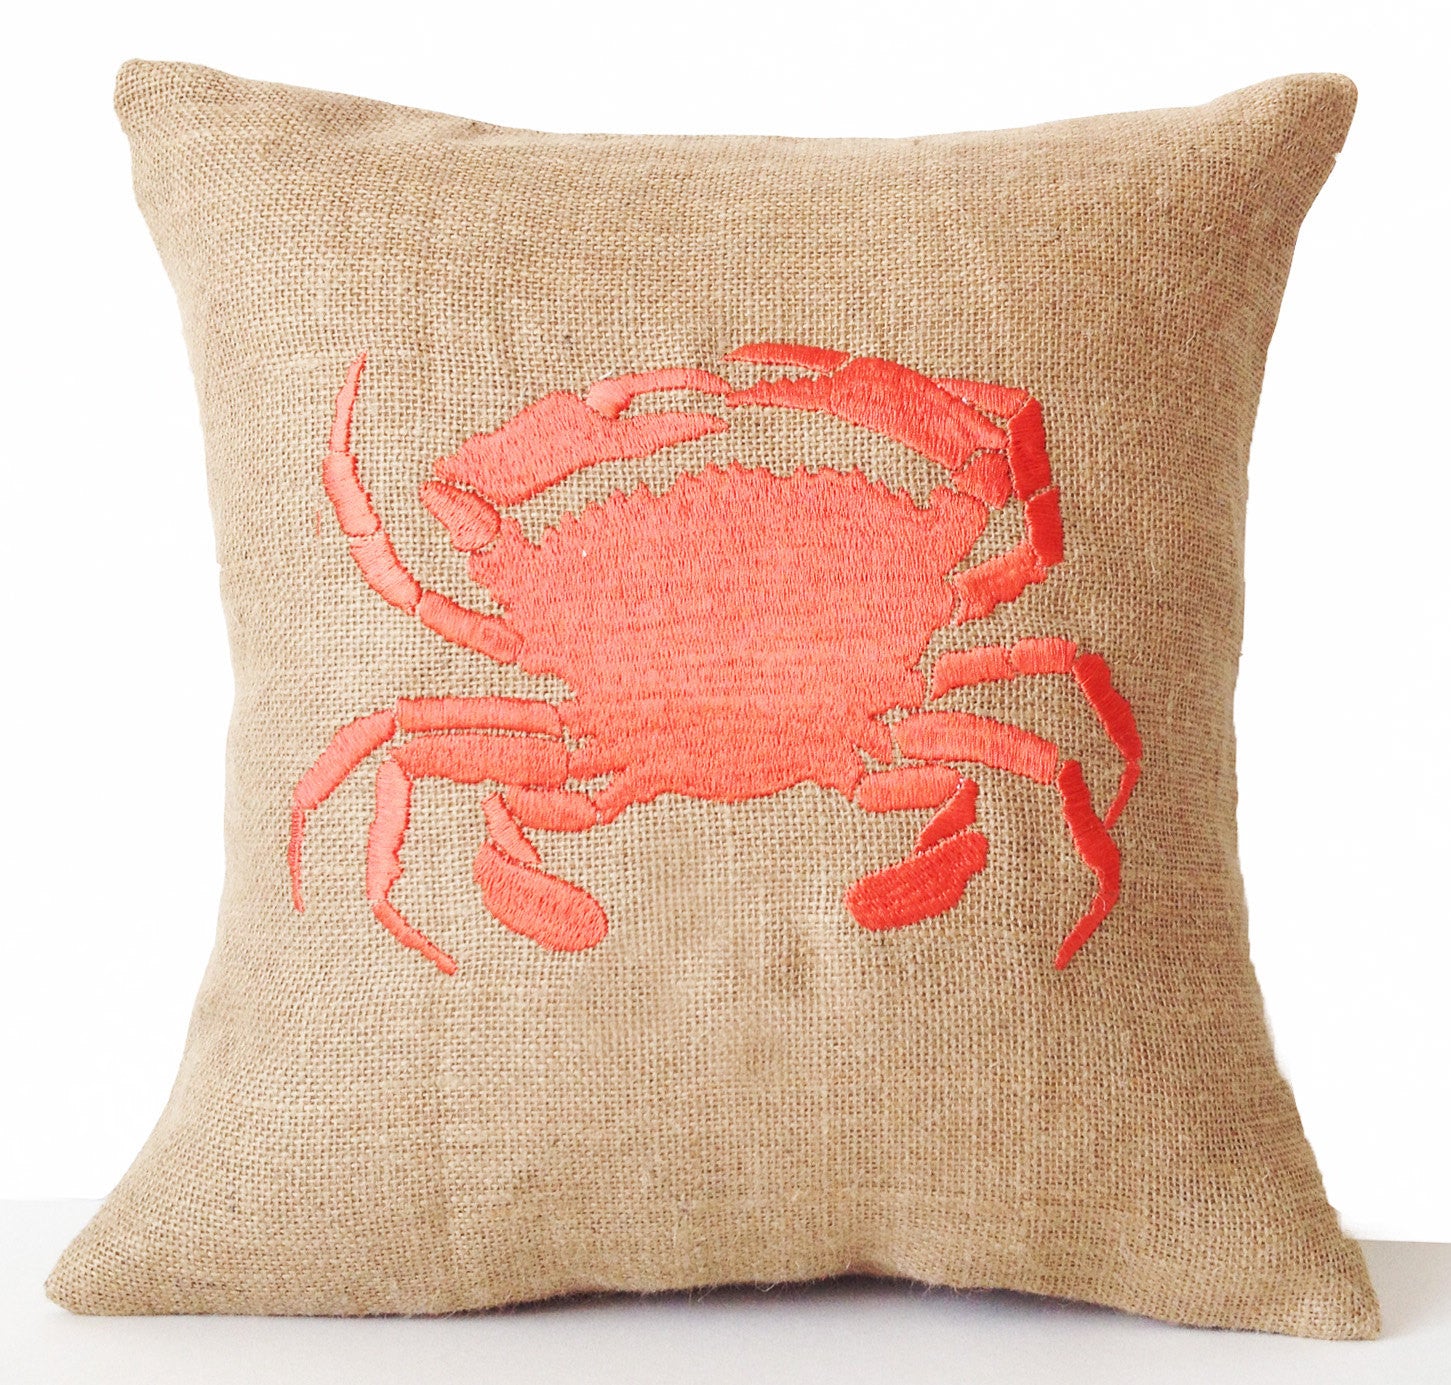 Handmade sea pillow cover with embroidered crab design